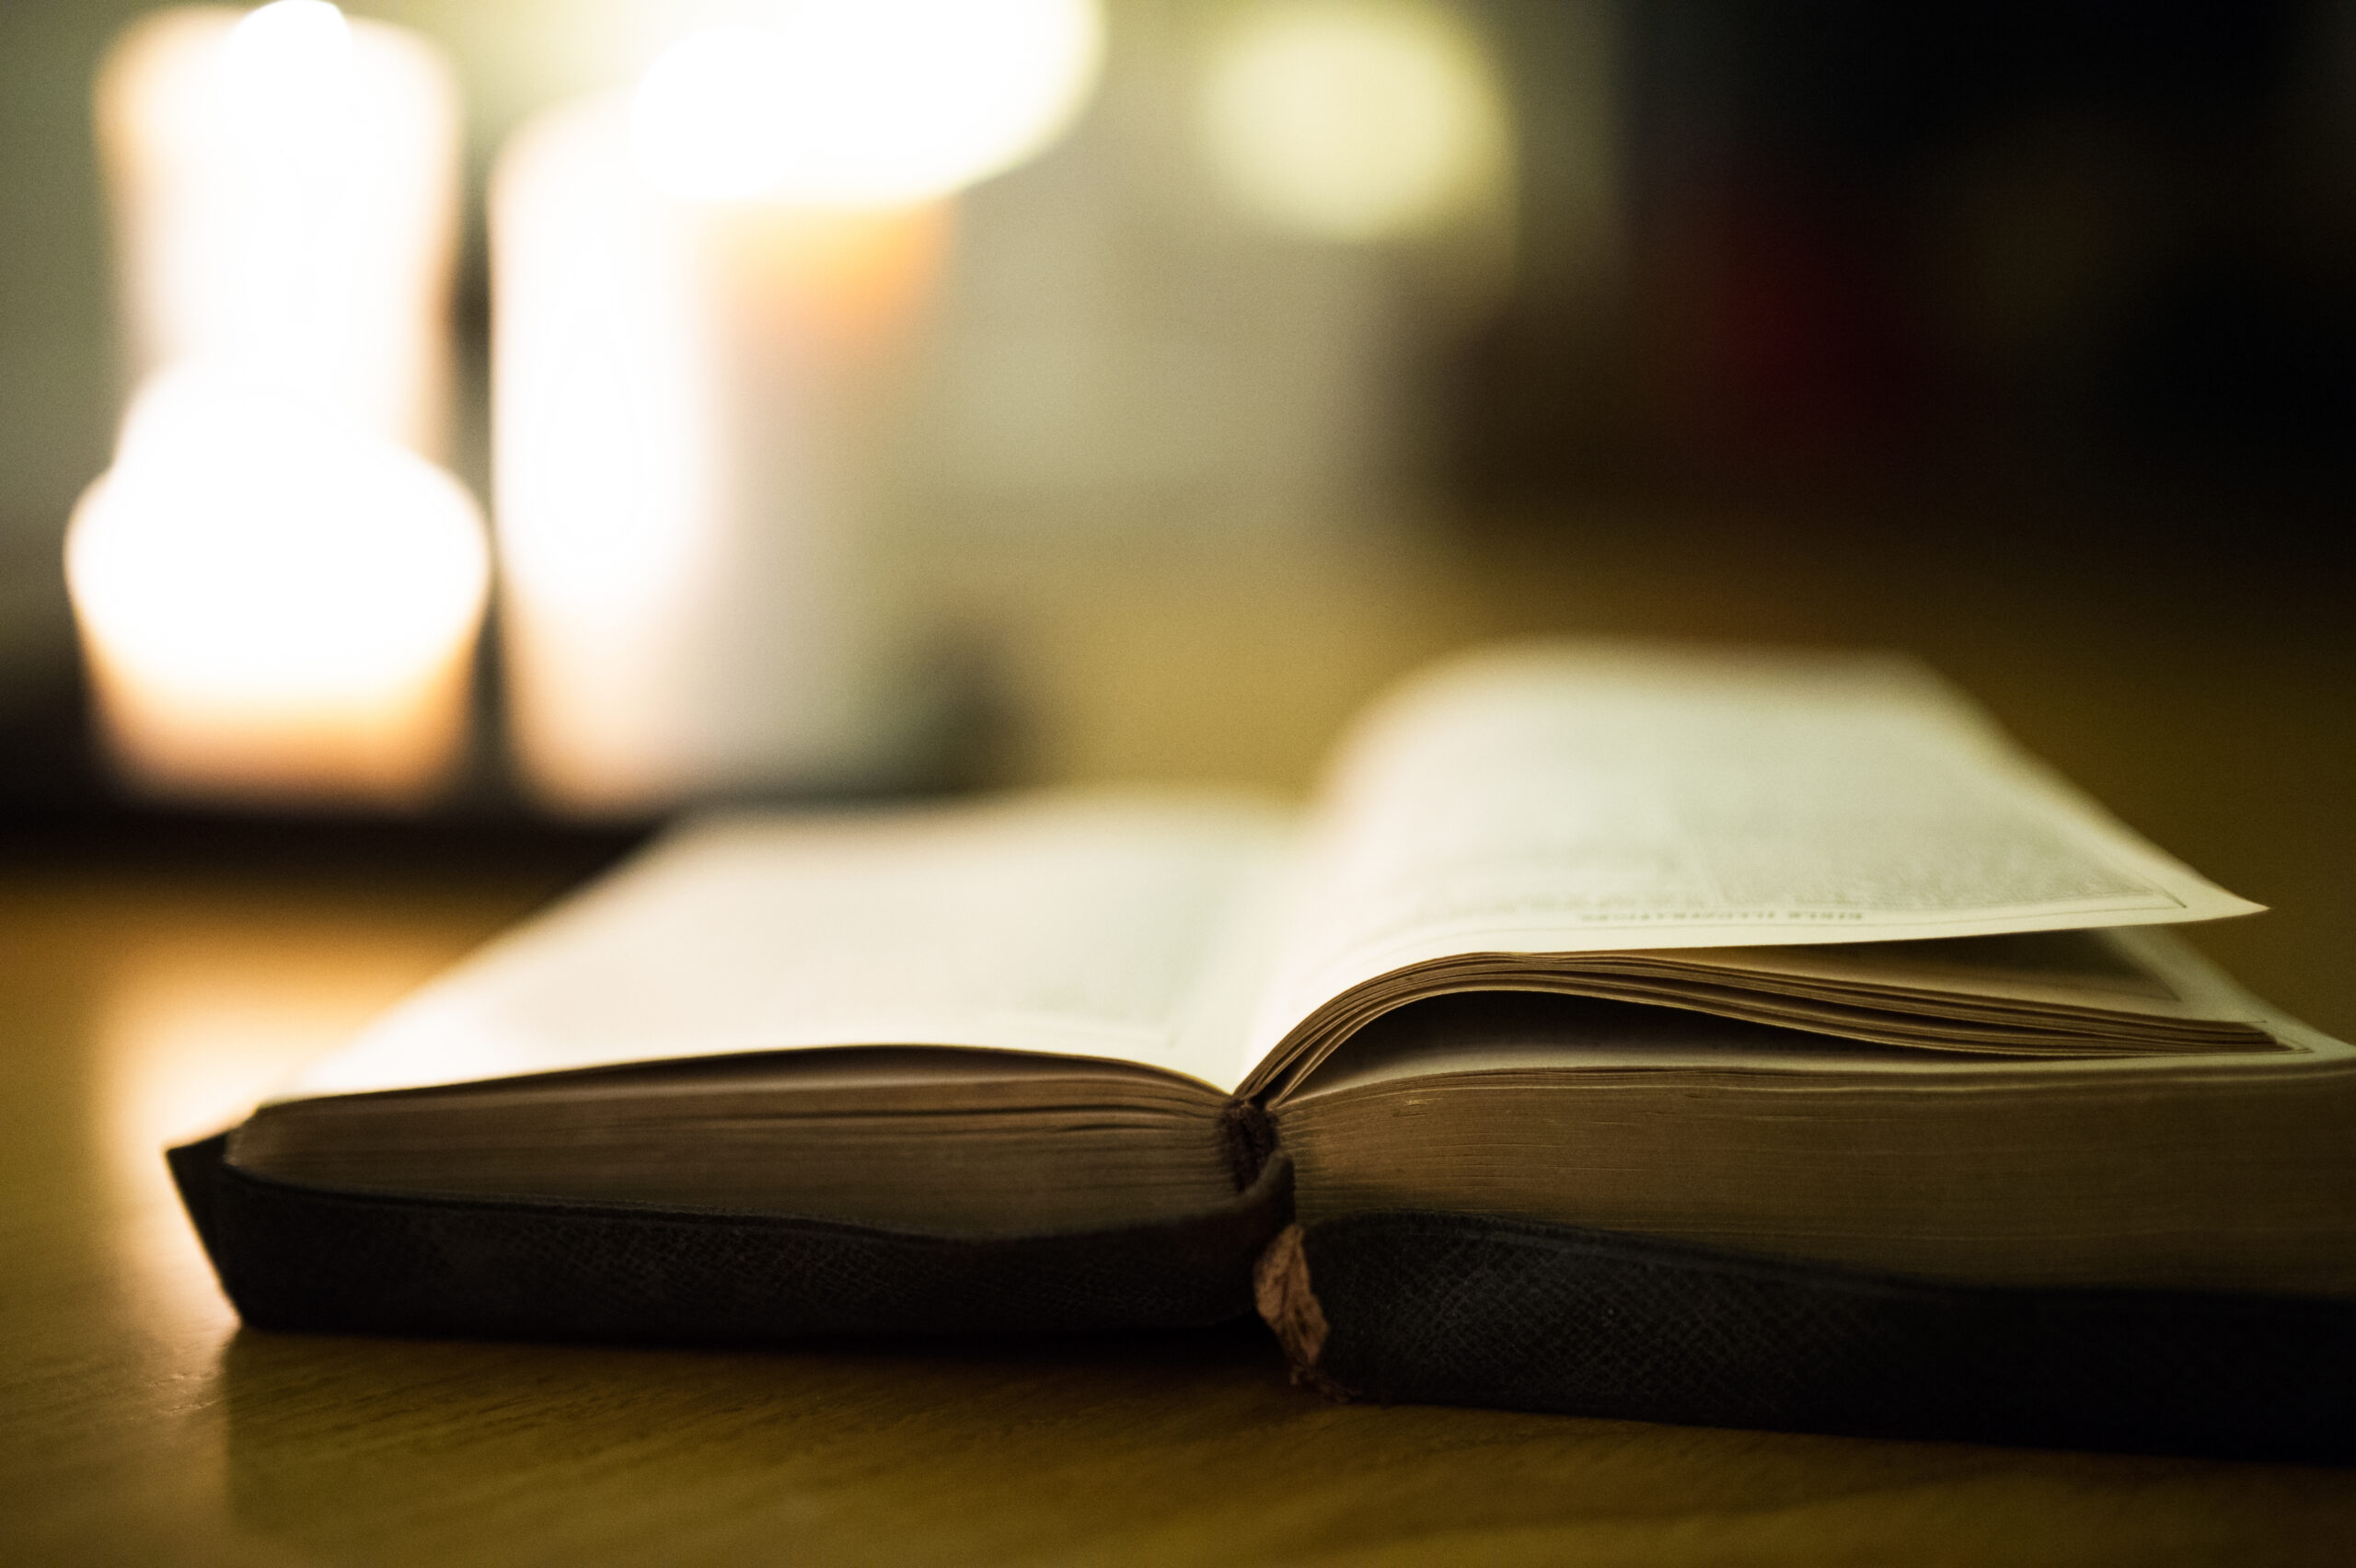 graphicstock close up of an old bible laid on wooden floor burning candles in the background H x53hu8Mb 2 scaled